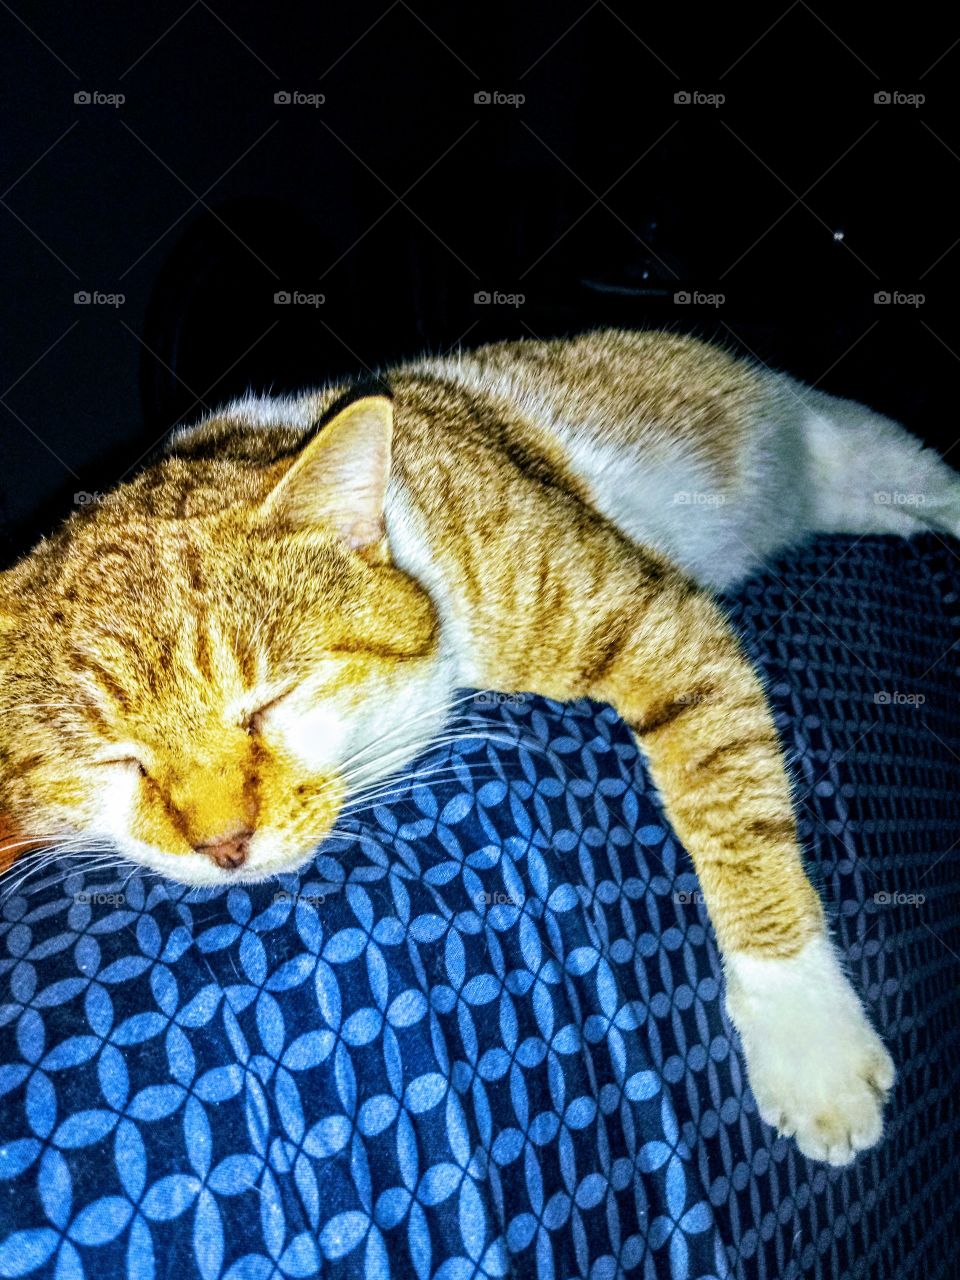 Orange Tabby Cat sleeping on the edge of a blue bed